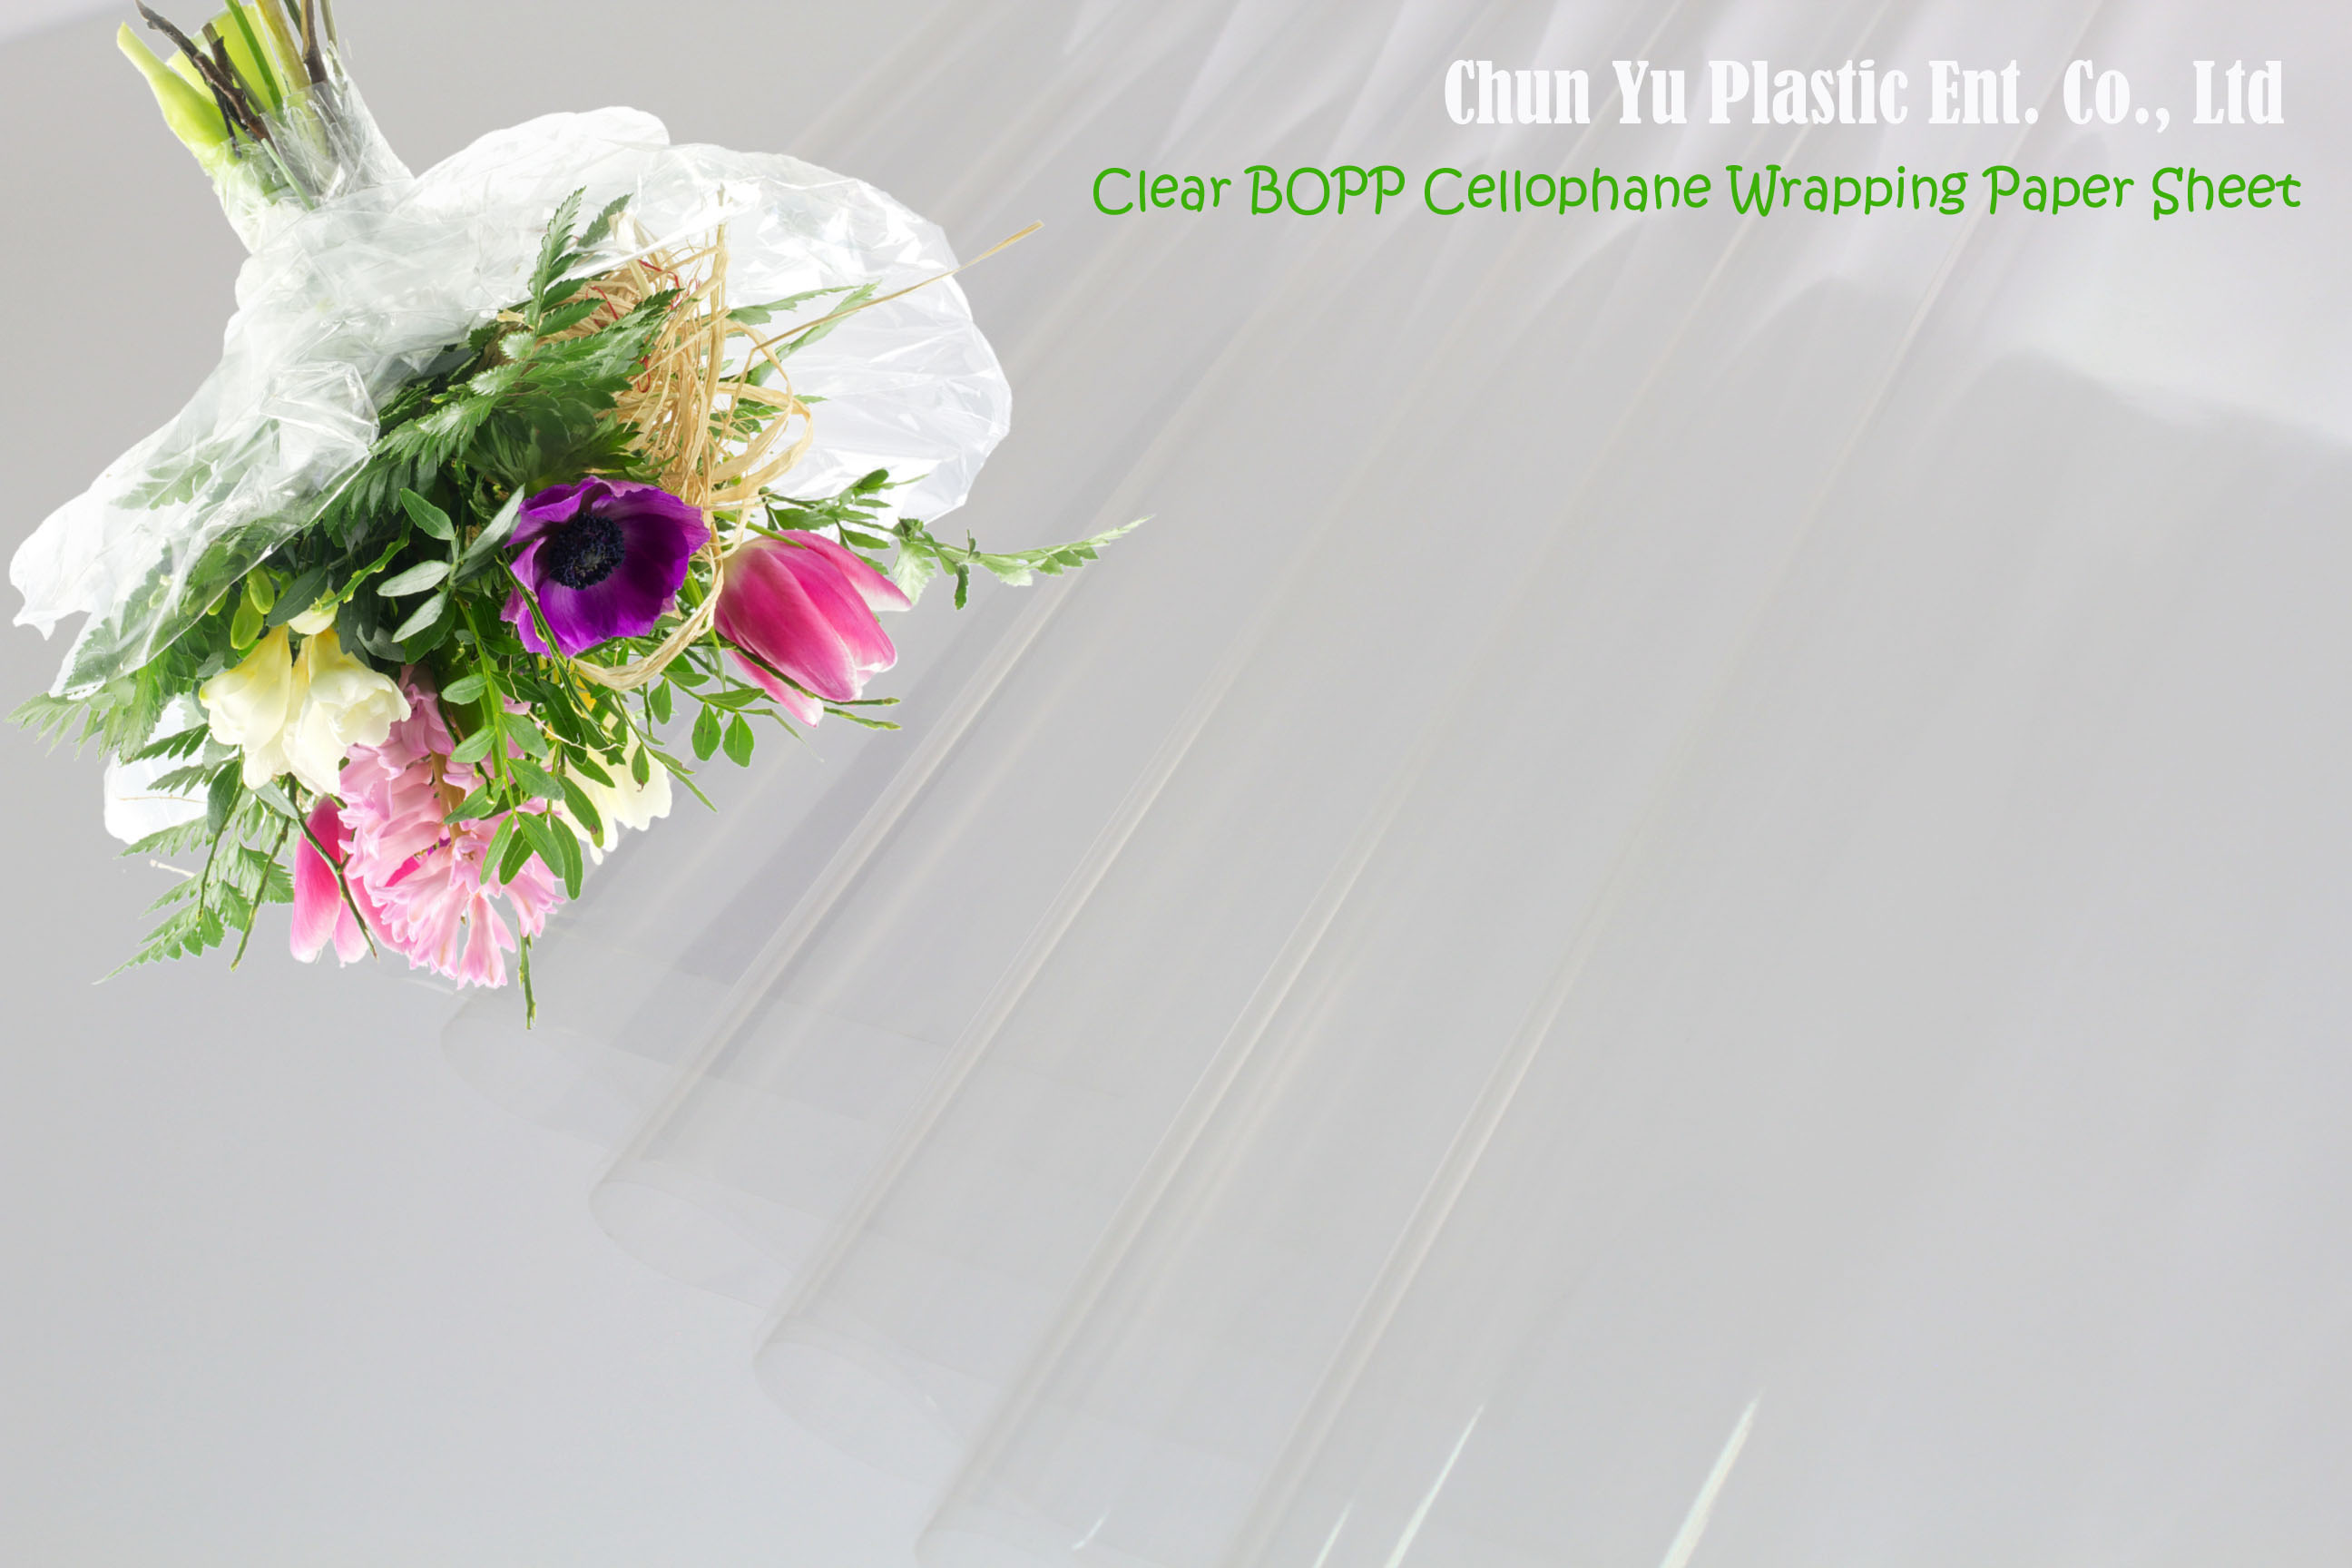 Cut flower bouquet wrapped with clear cellophane wrapping paper sheet